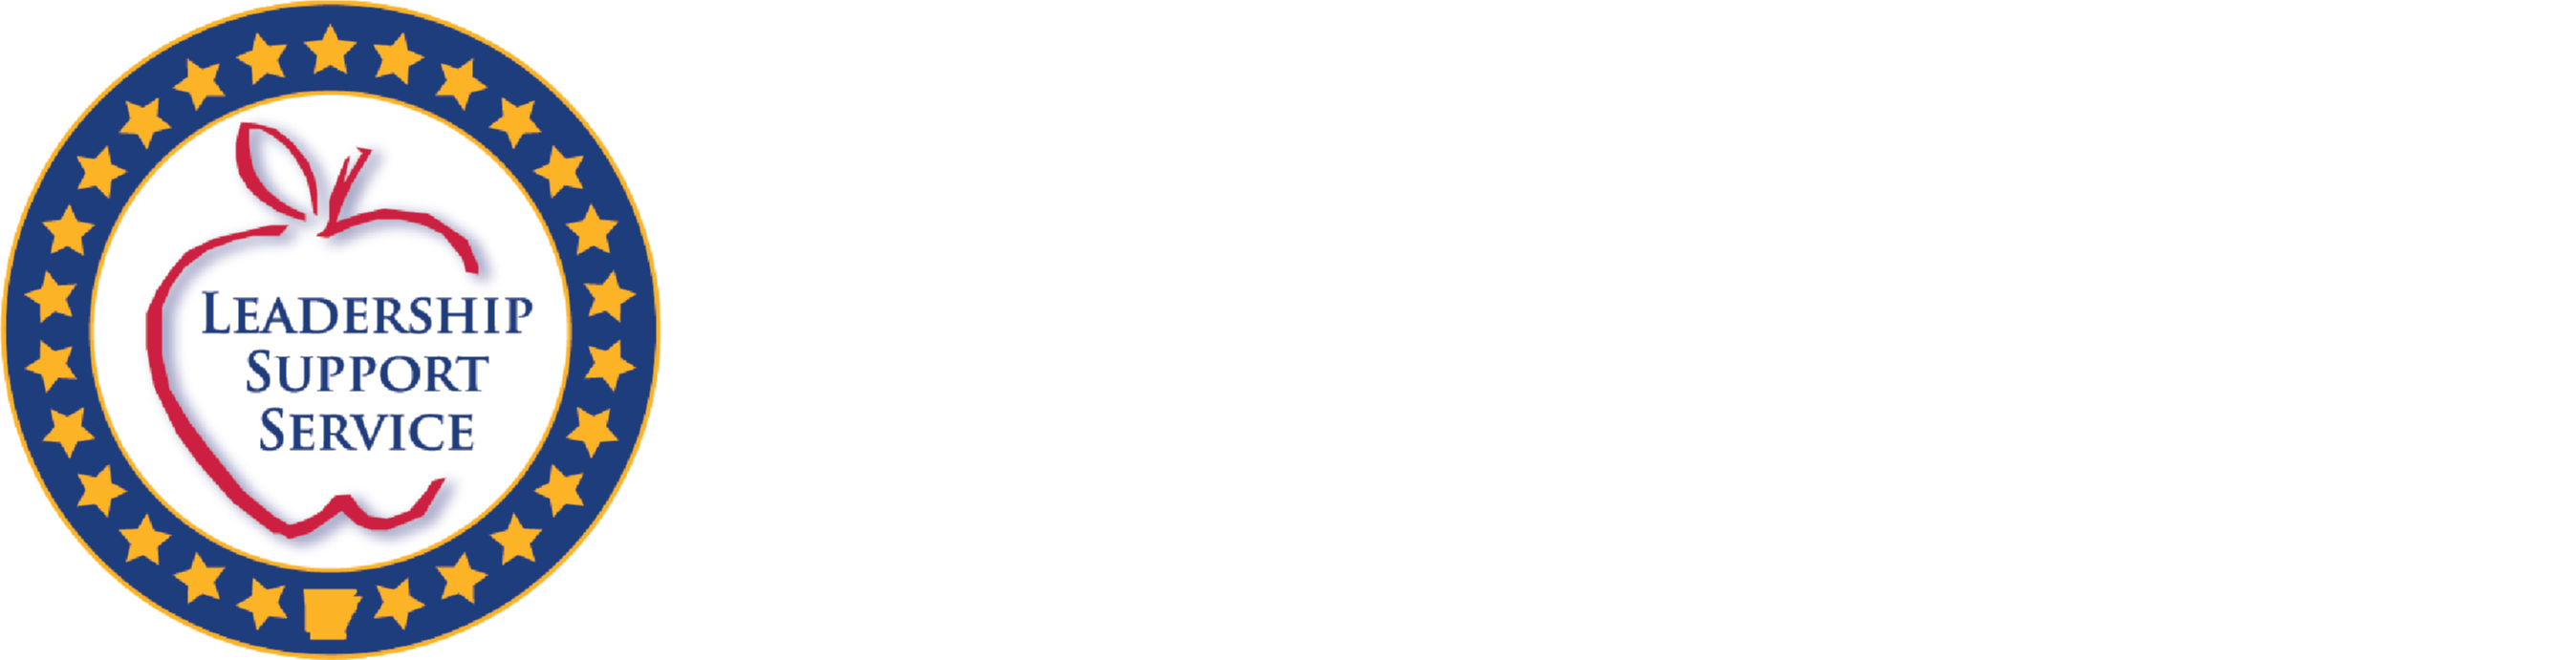 AR Dept of Education State Required Information